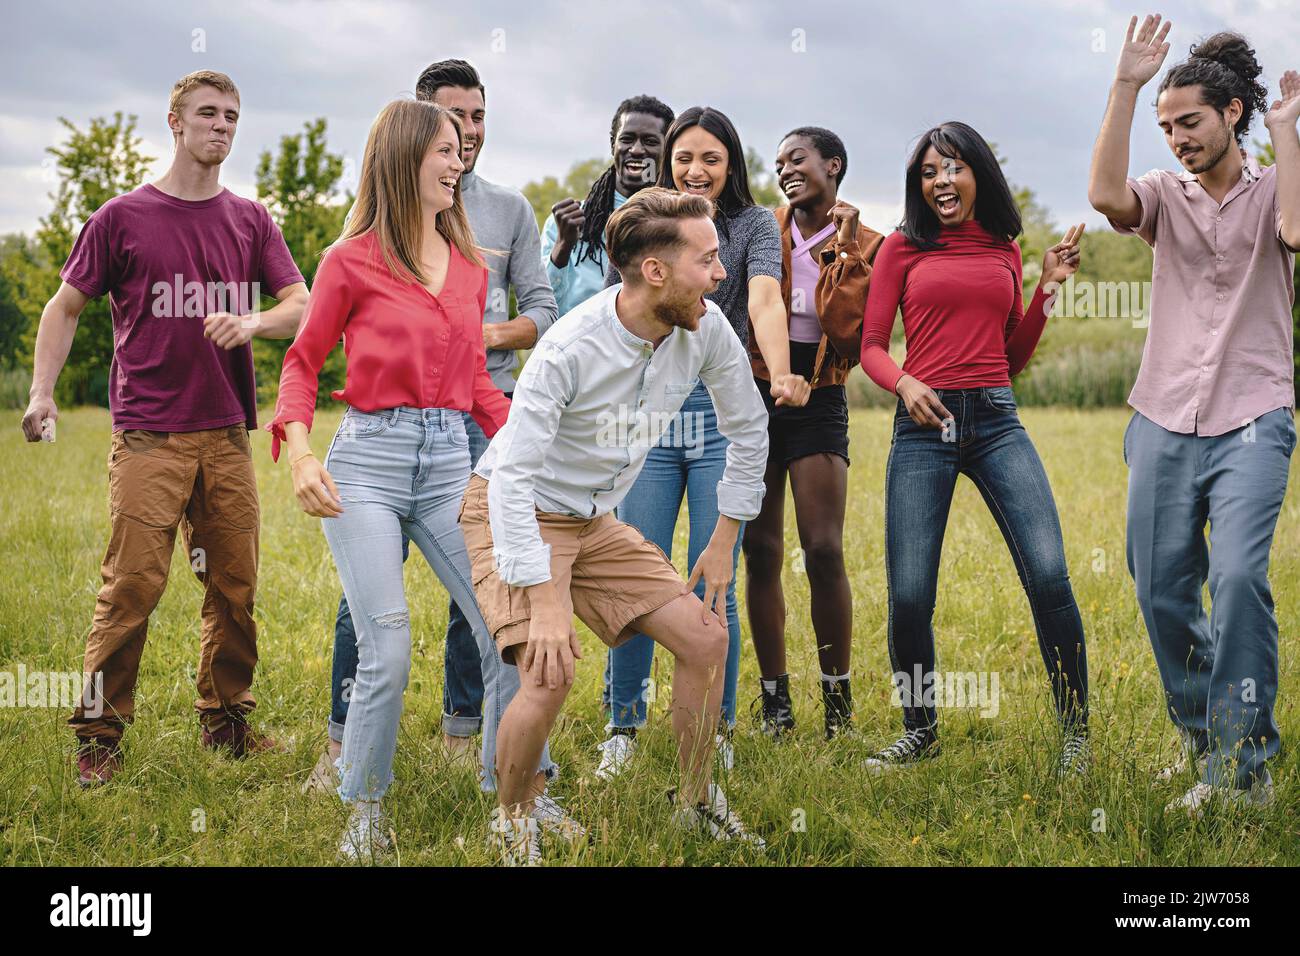 Cheerful multiracial group happy young people having fun dancing together playing together smiling and bonding together - multiethnic friends gatherin Stock Photo